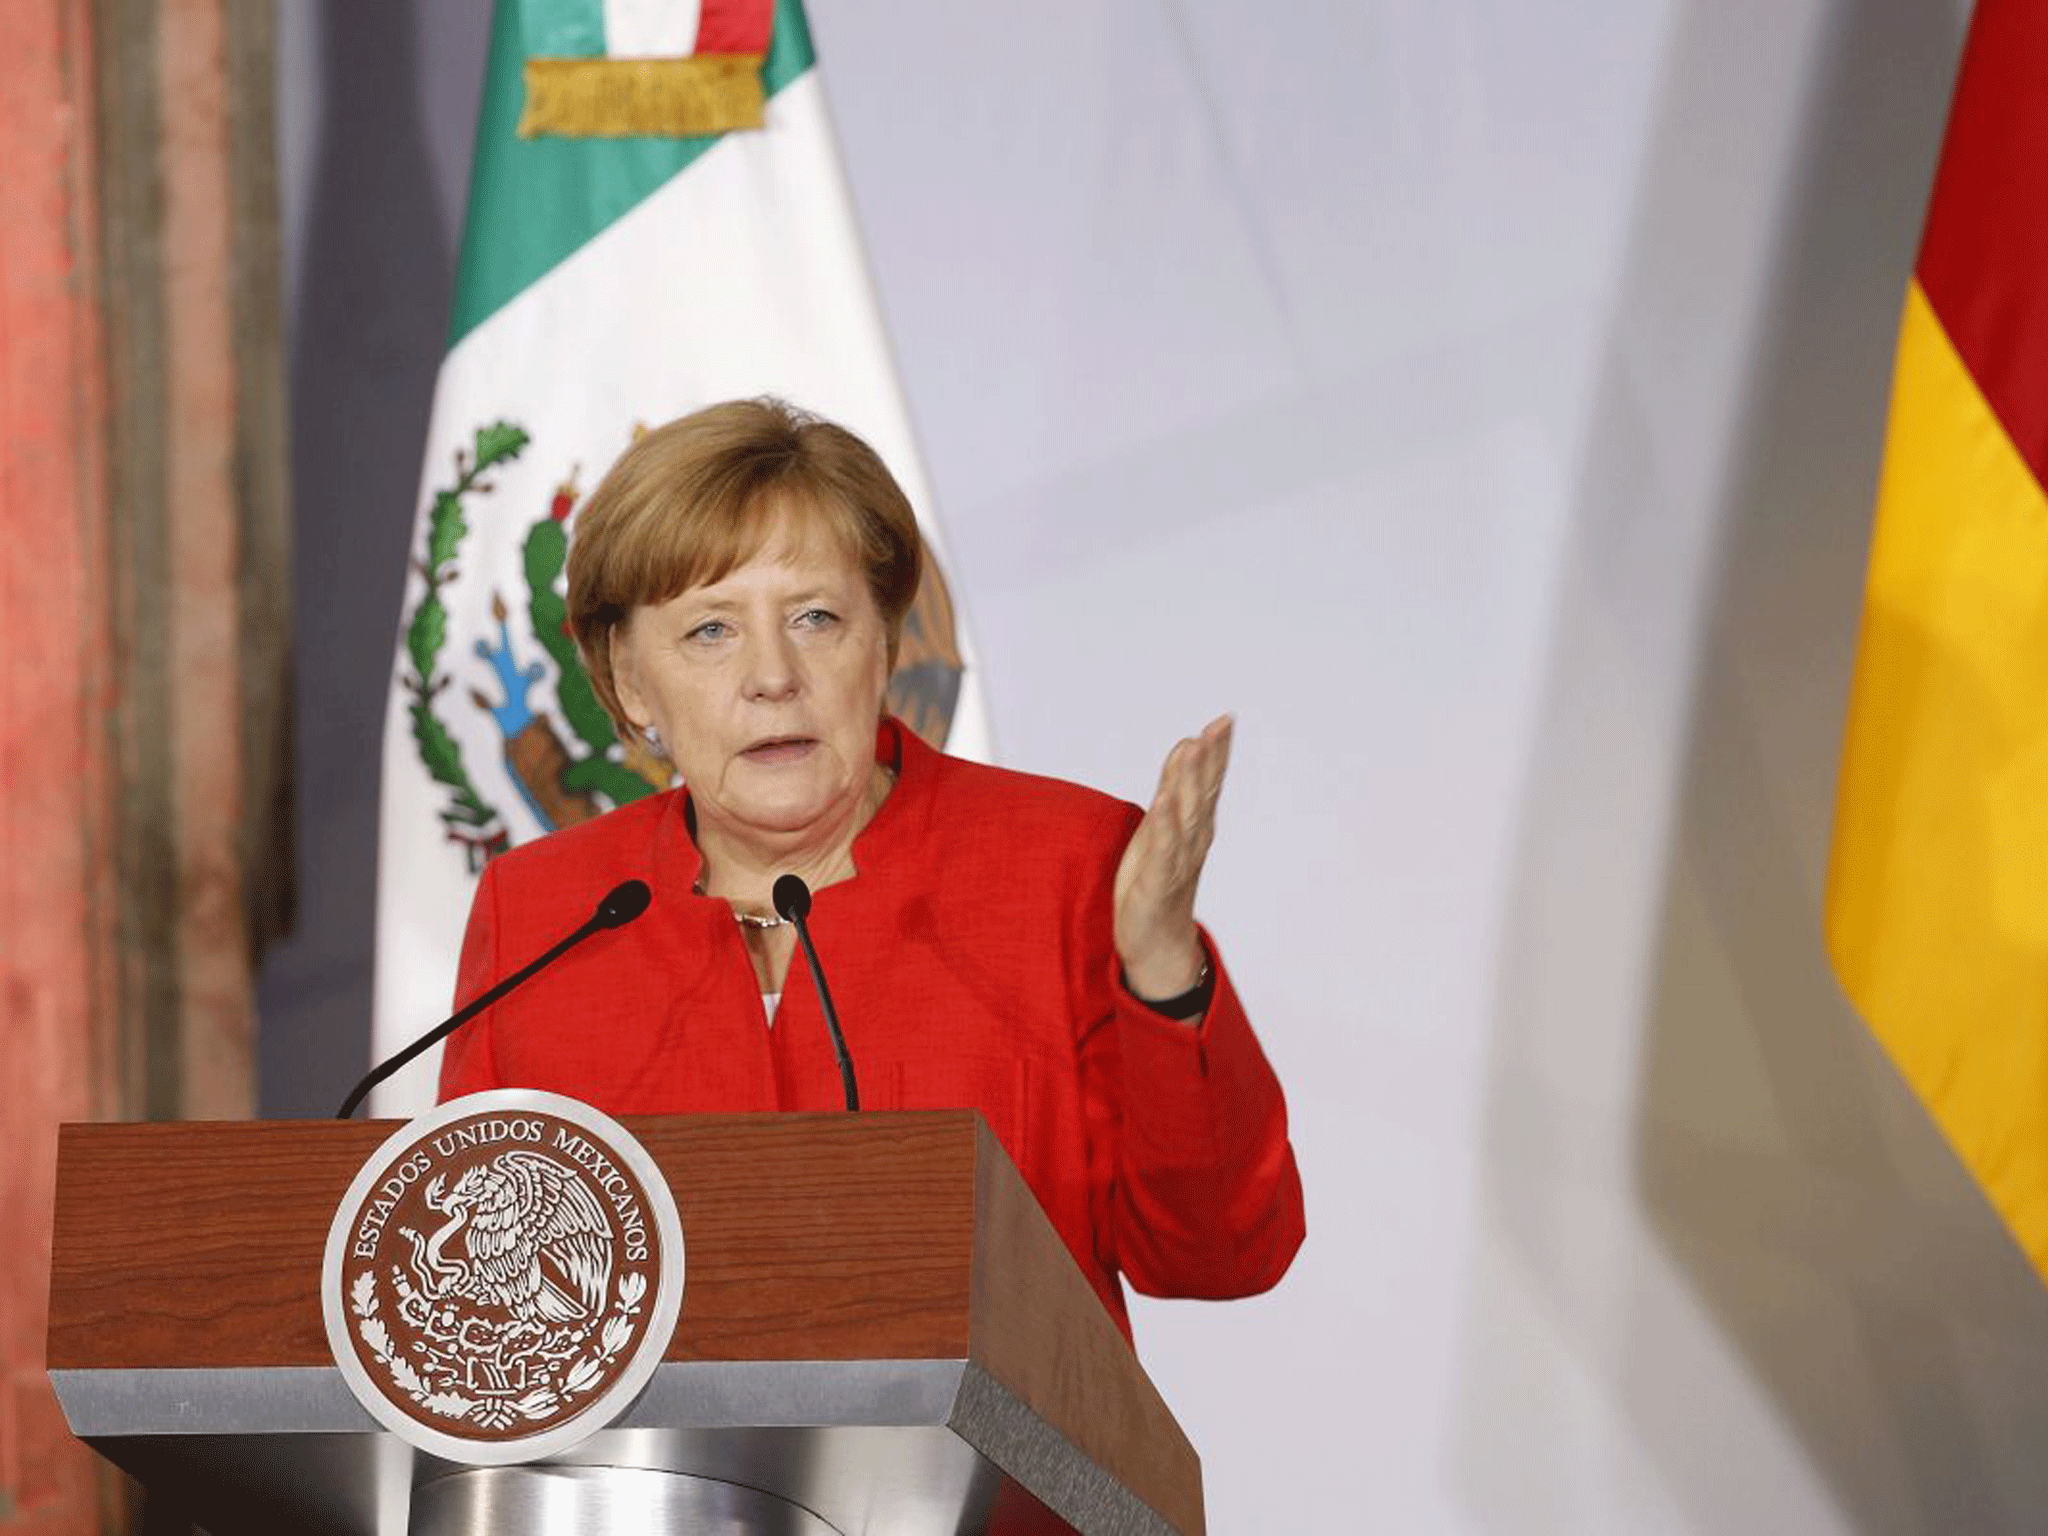 Merkel condemns 'putting up walls' on visit to Mexico